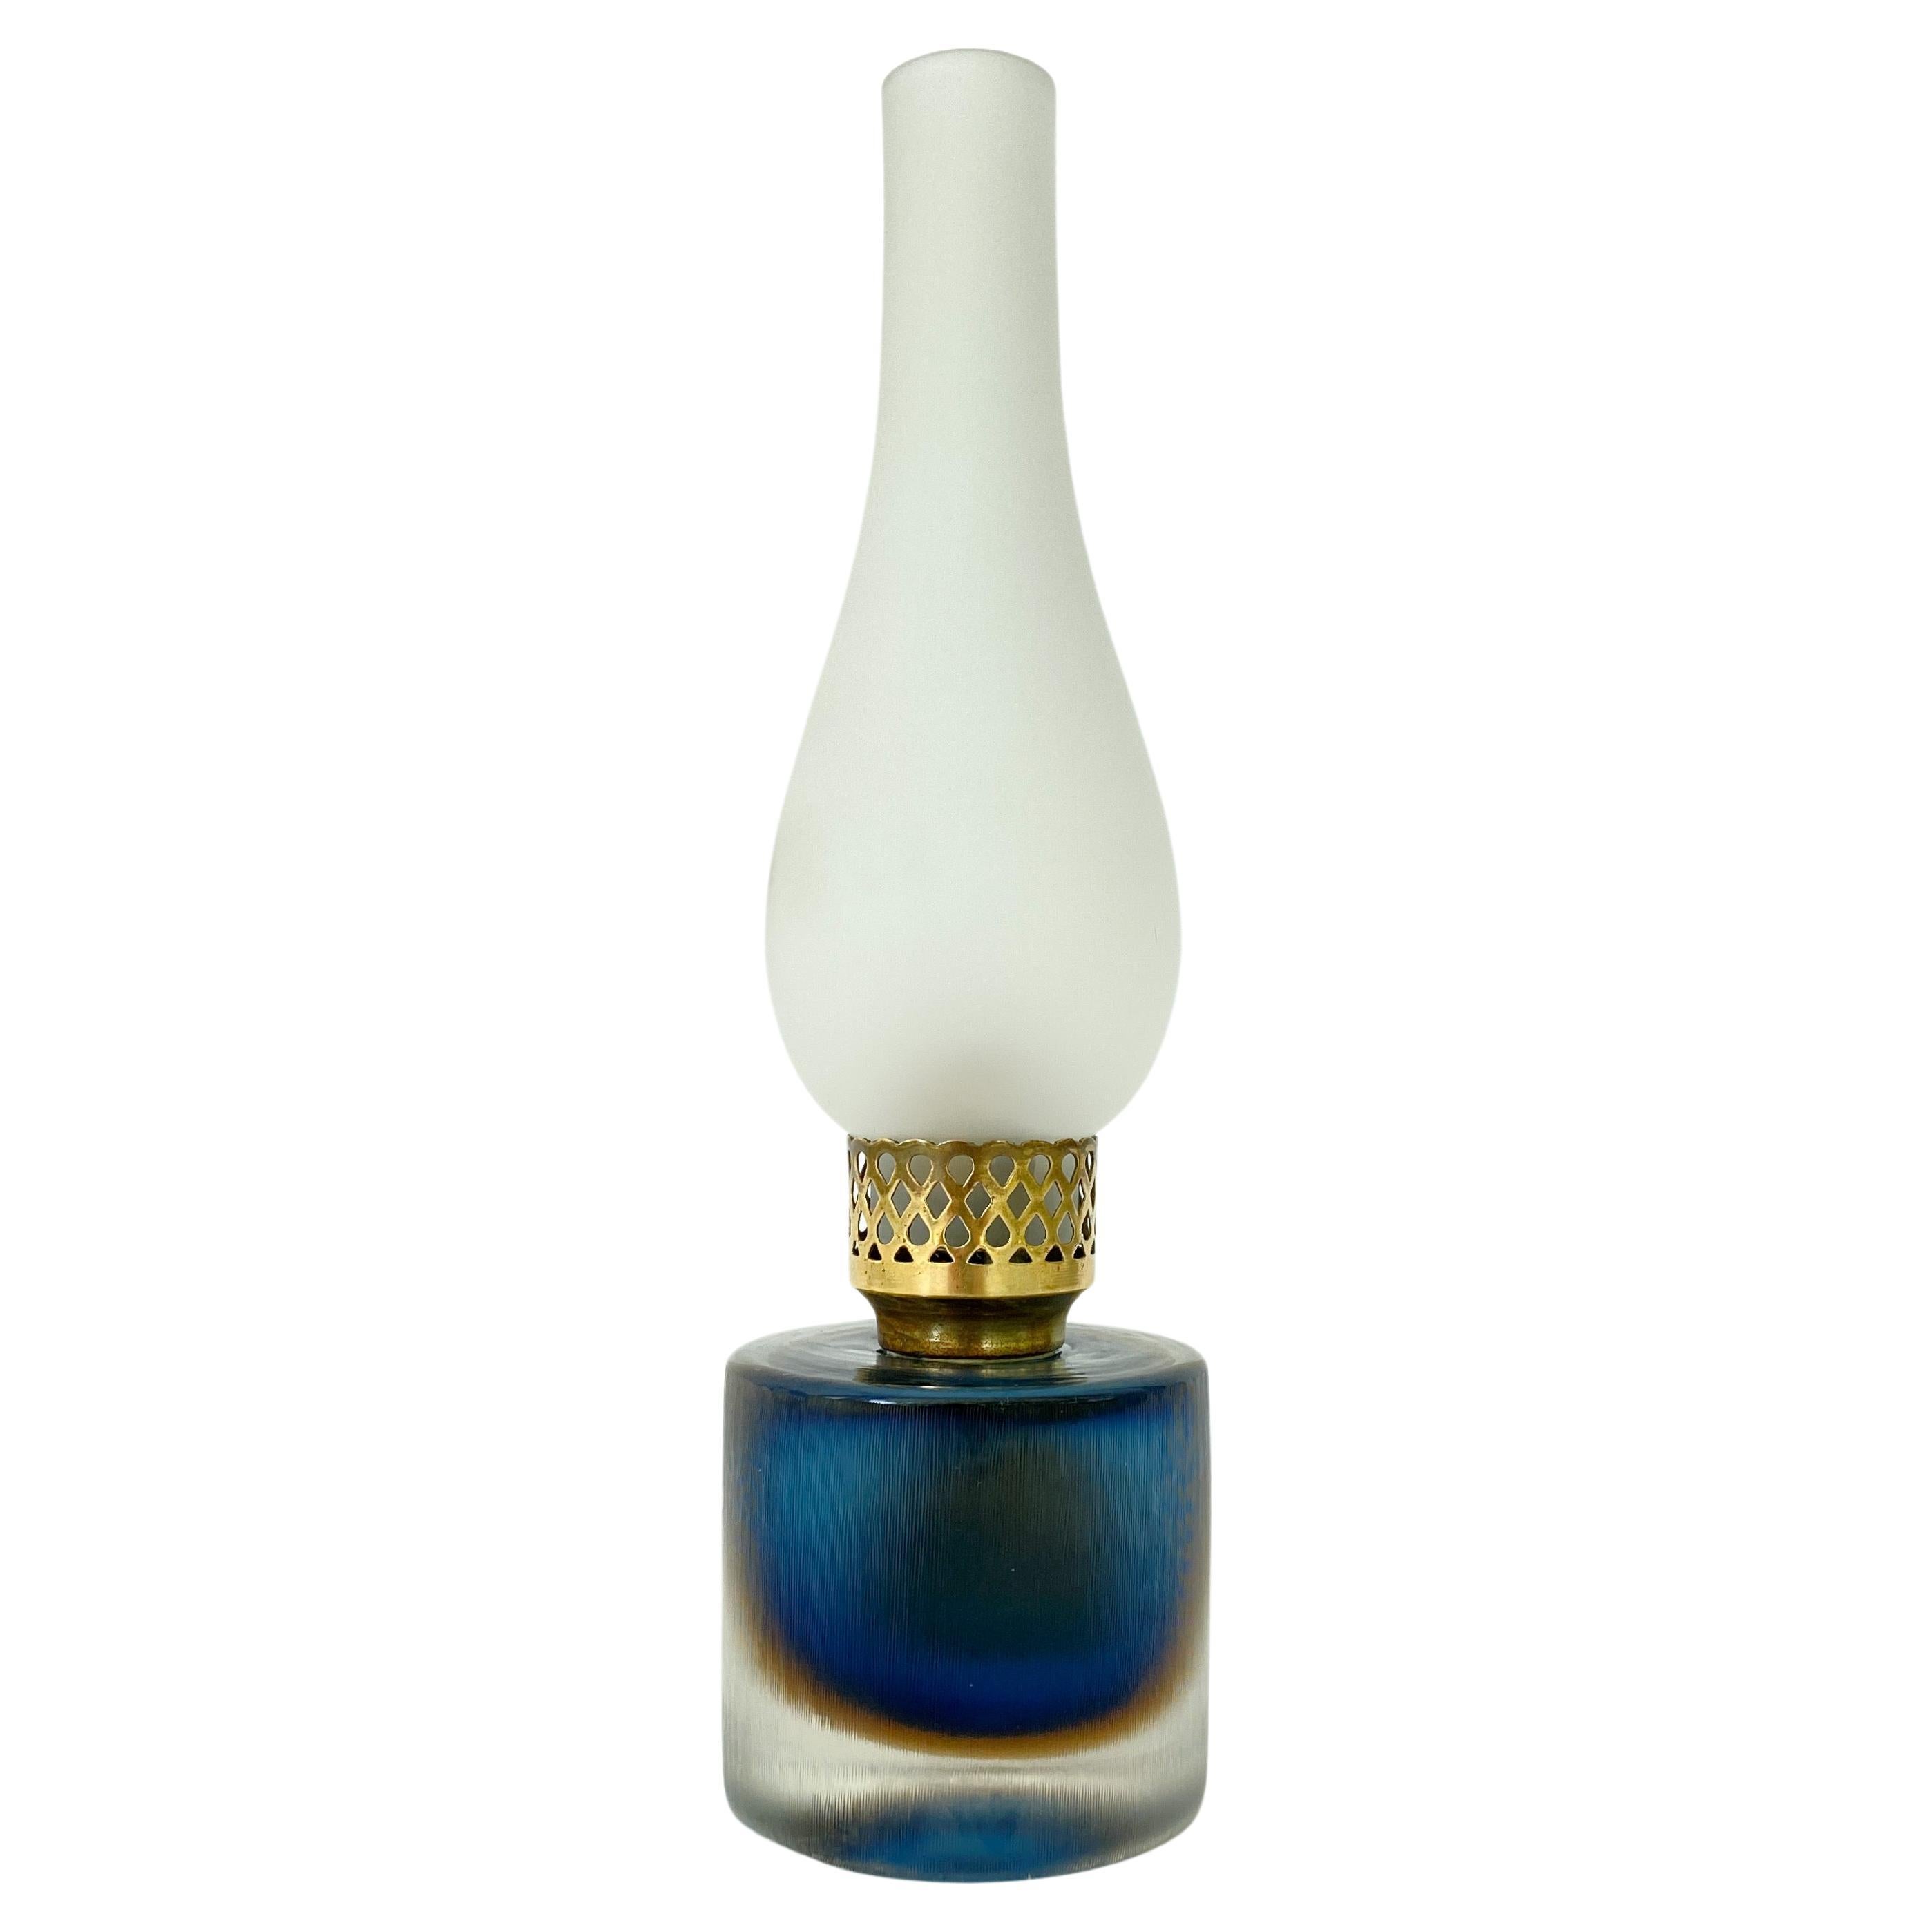 Venini 12" Sommerso Inciso Blue / Amber Lamp, Three Line Acid Etched